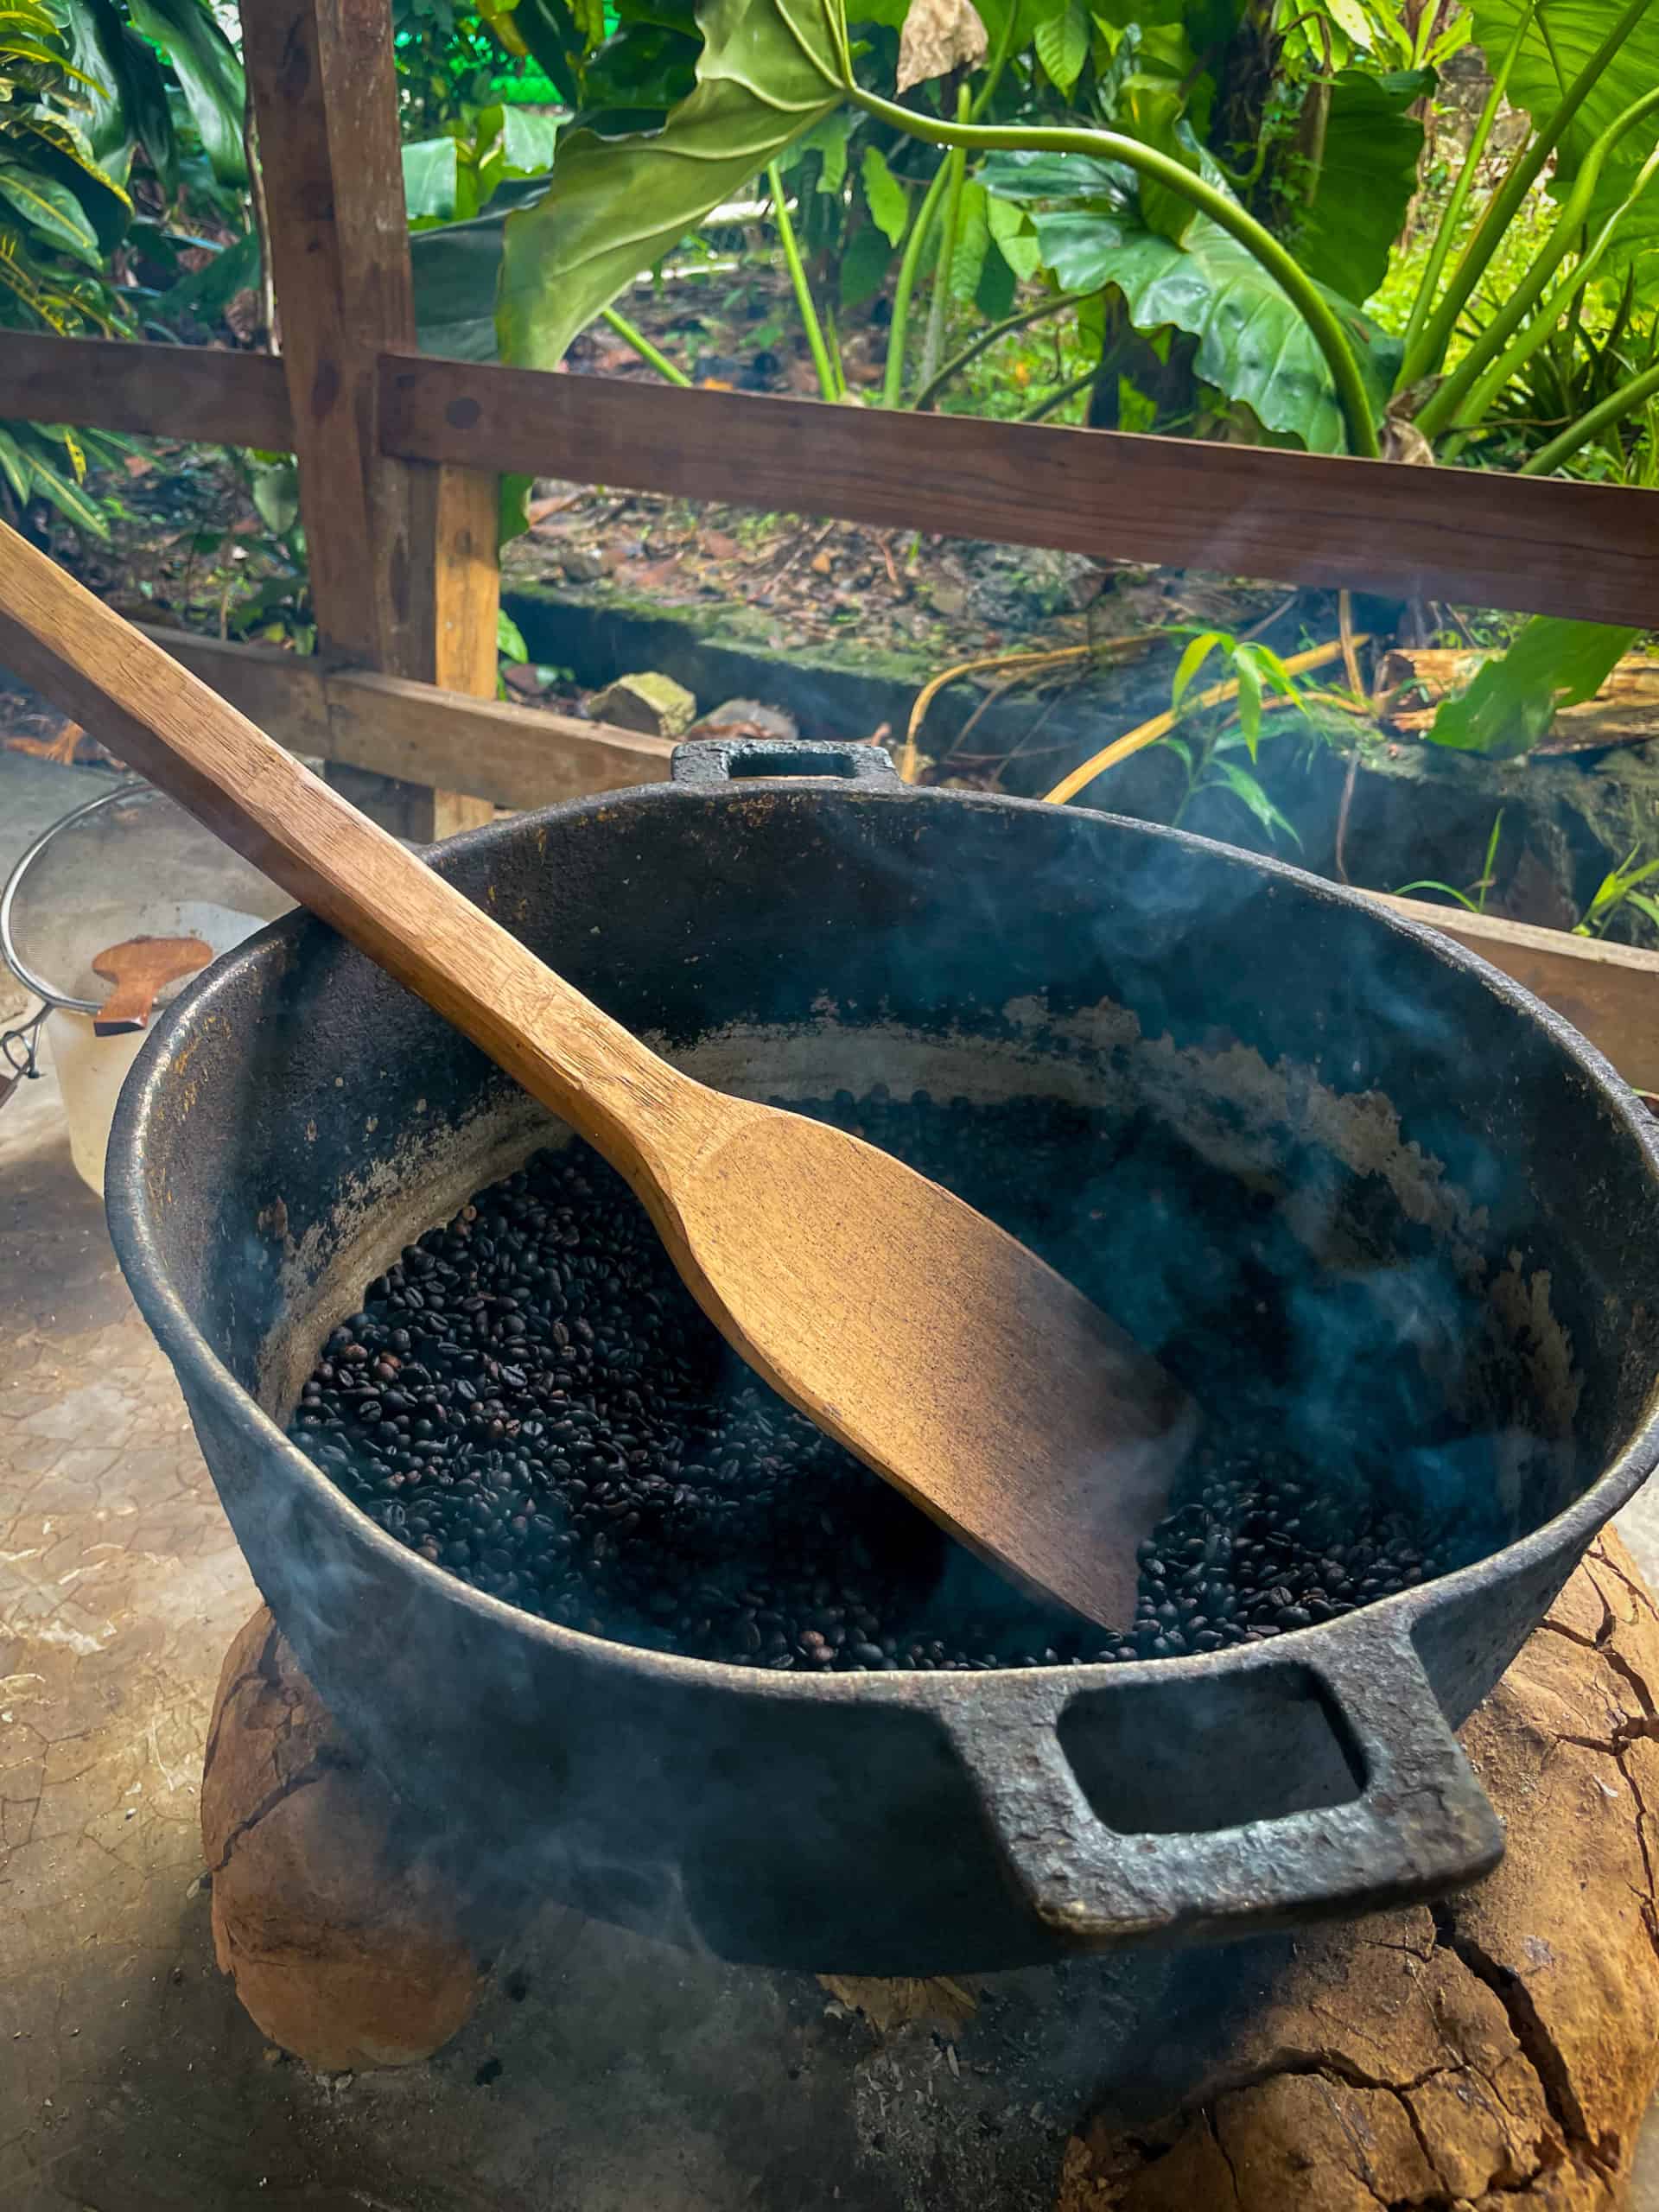 Dominican Republic - roaasting coffee beans the traditional way in the mountains